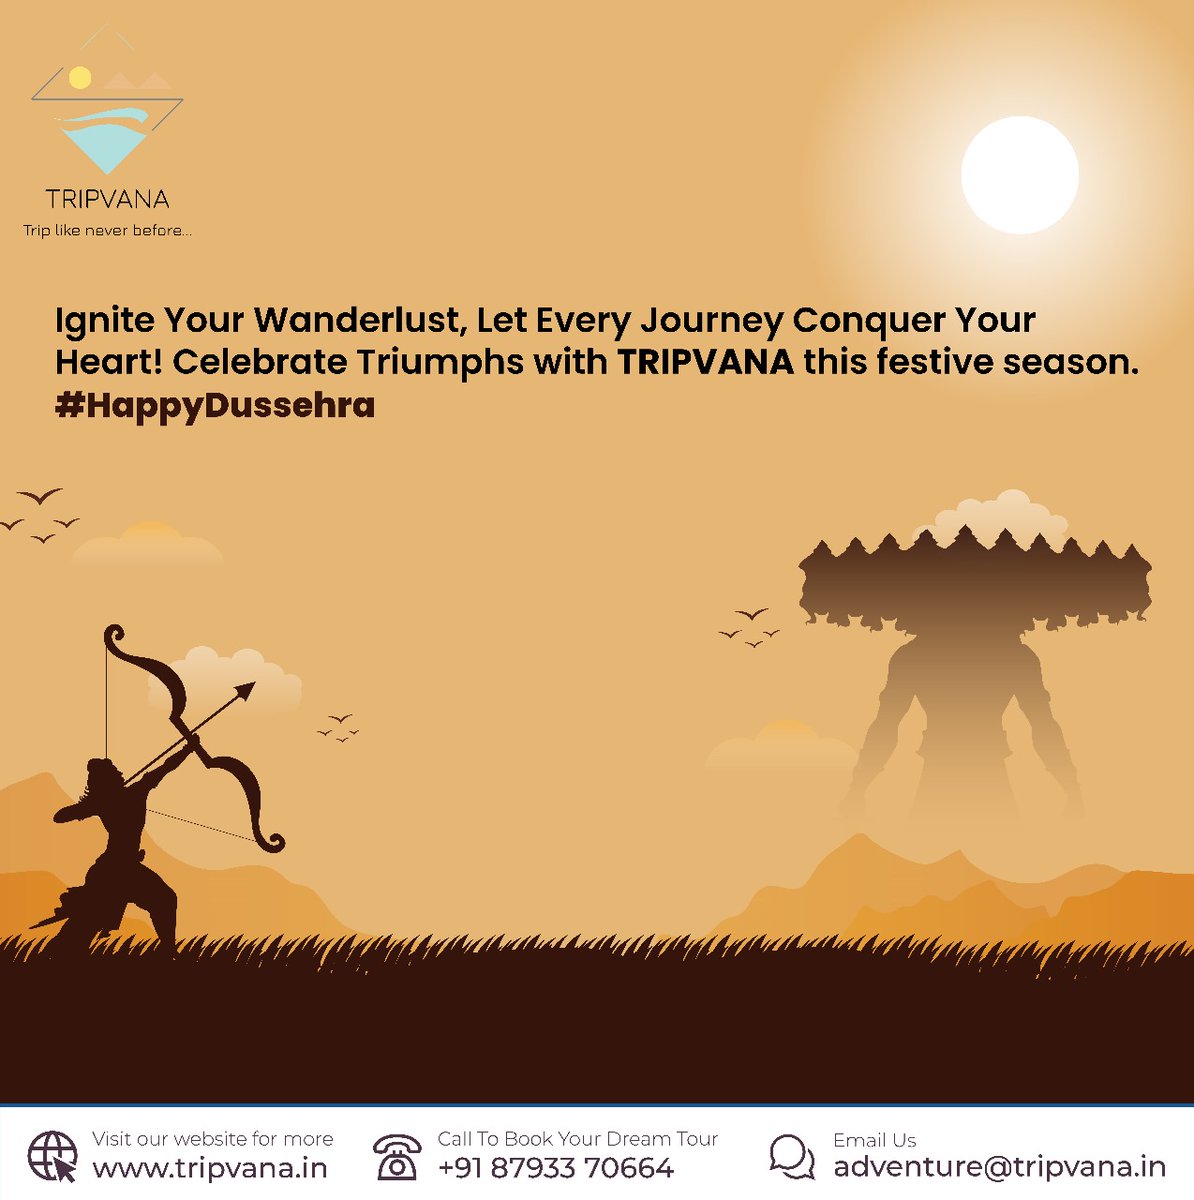 On this Auspicious Day, Embark on New Journeys with Tripvana and Celebrate Triumphs Around the World. 🌍
#dussehra #dussehra2023 #dussehrawishes #dussehraspecial #dussehrafestival #GoodOverEvil #explorepage #explore #tripplanner #tripplanning #tripplan #tourpackage #tourpackages